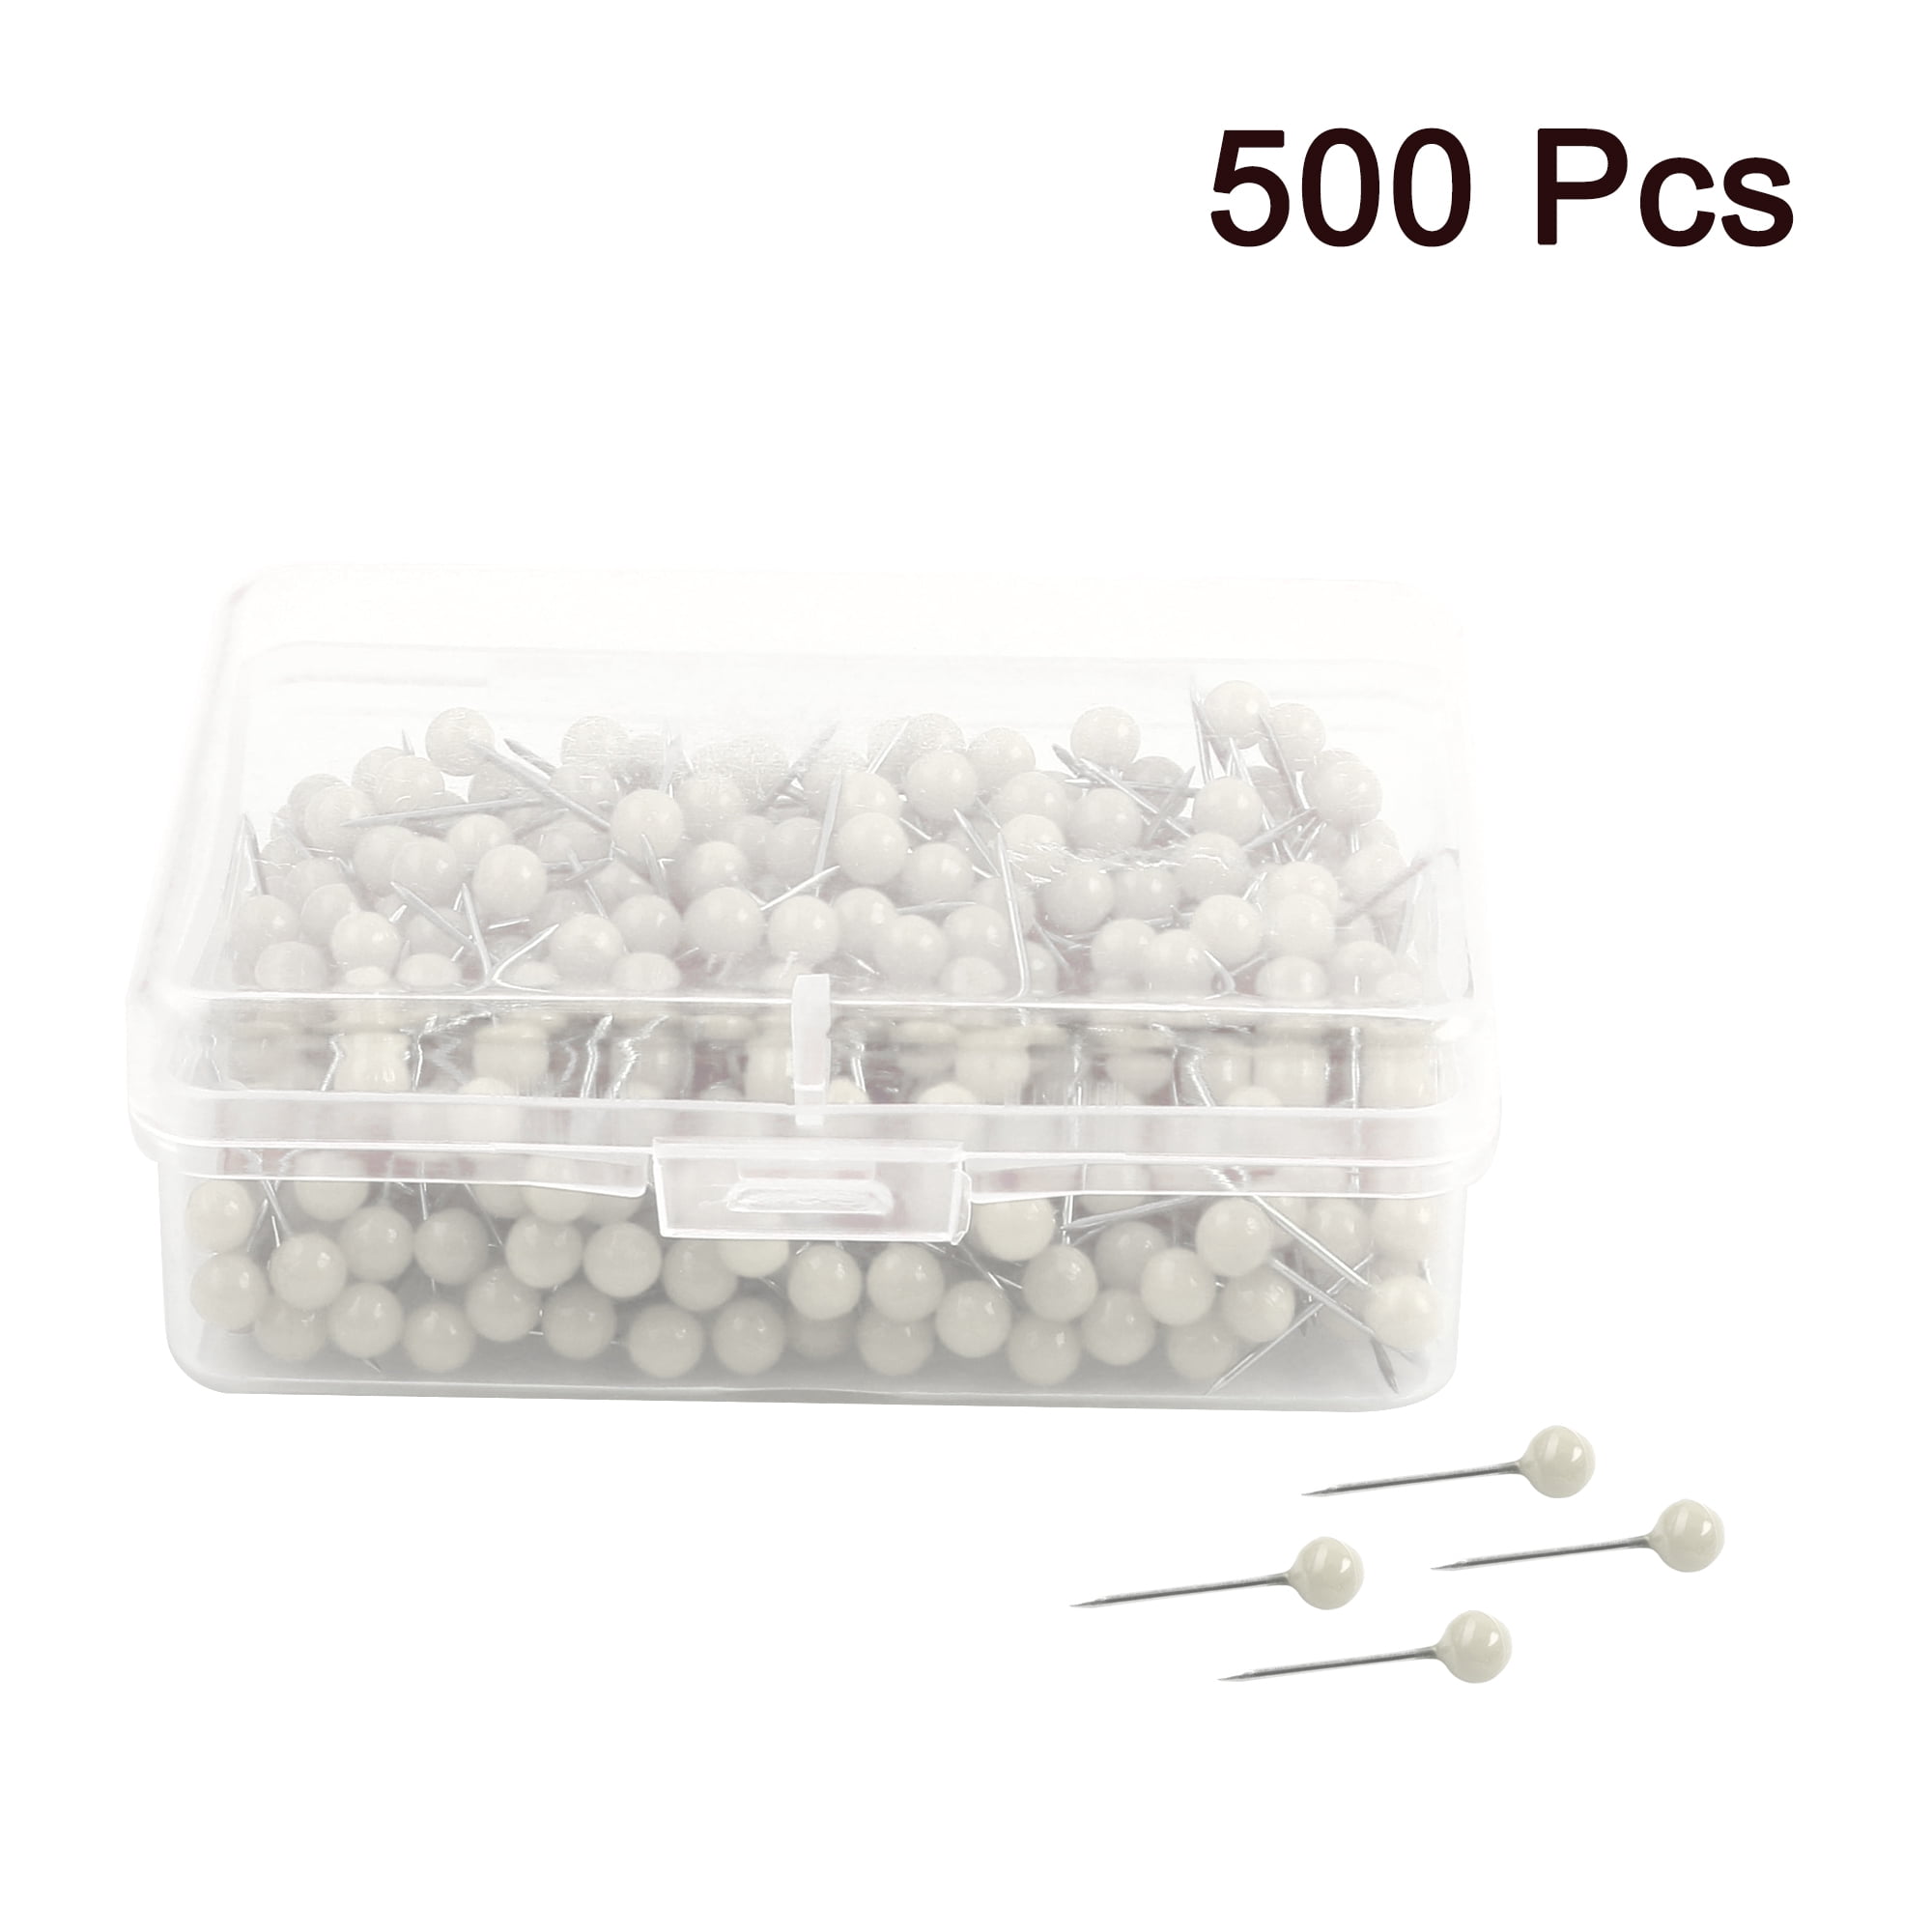 Uxcell 500pcs 1/8 Push Pins Round Head Thumb Tacks for Home Office Cork  Boards Map Note Picture Hanging White 